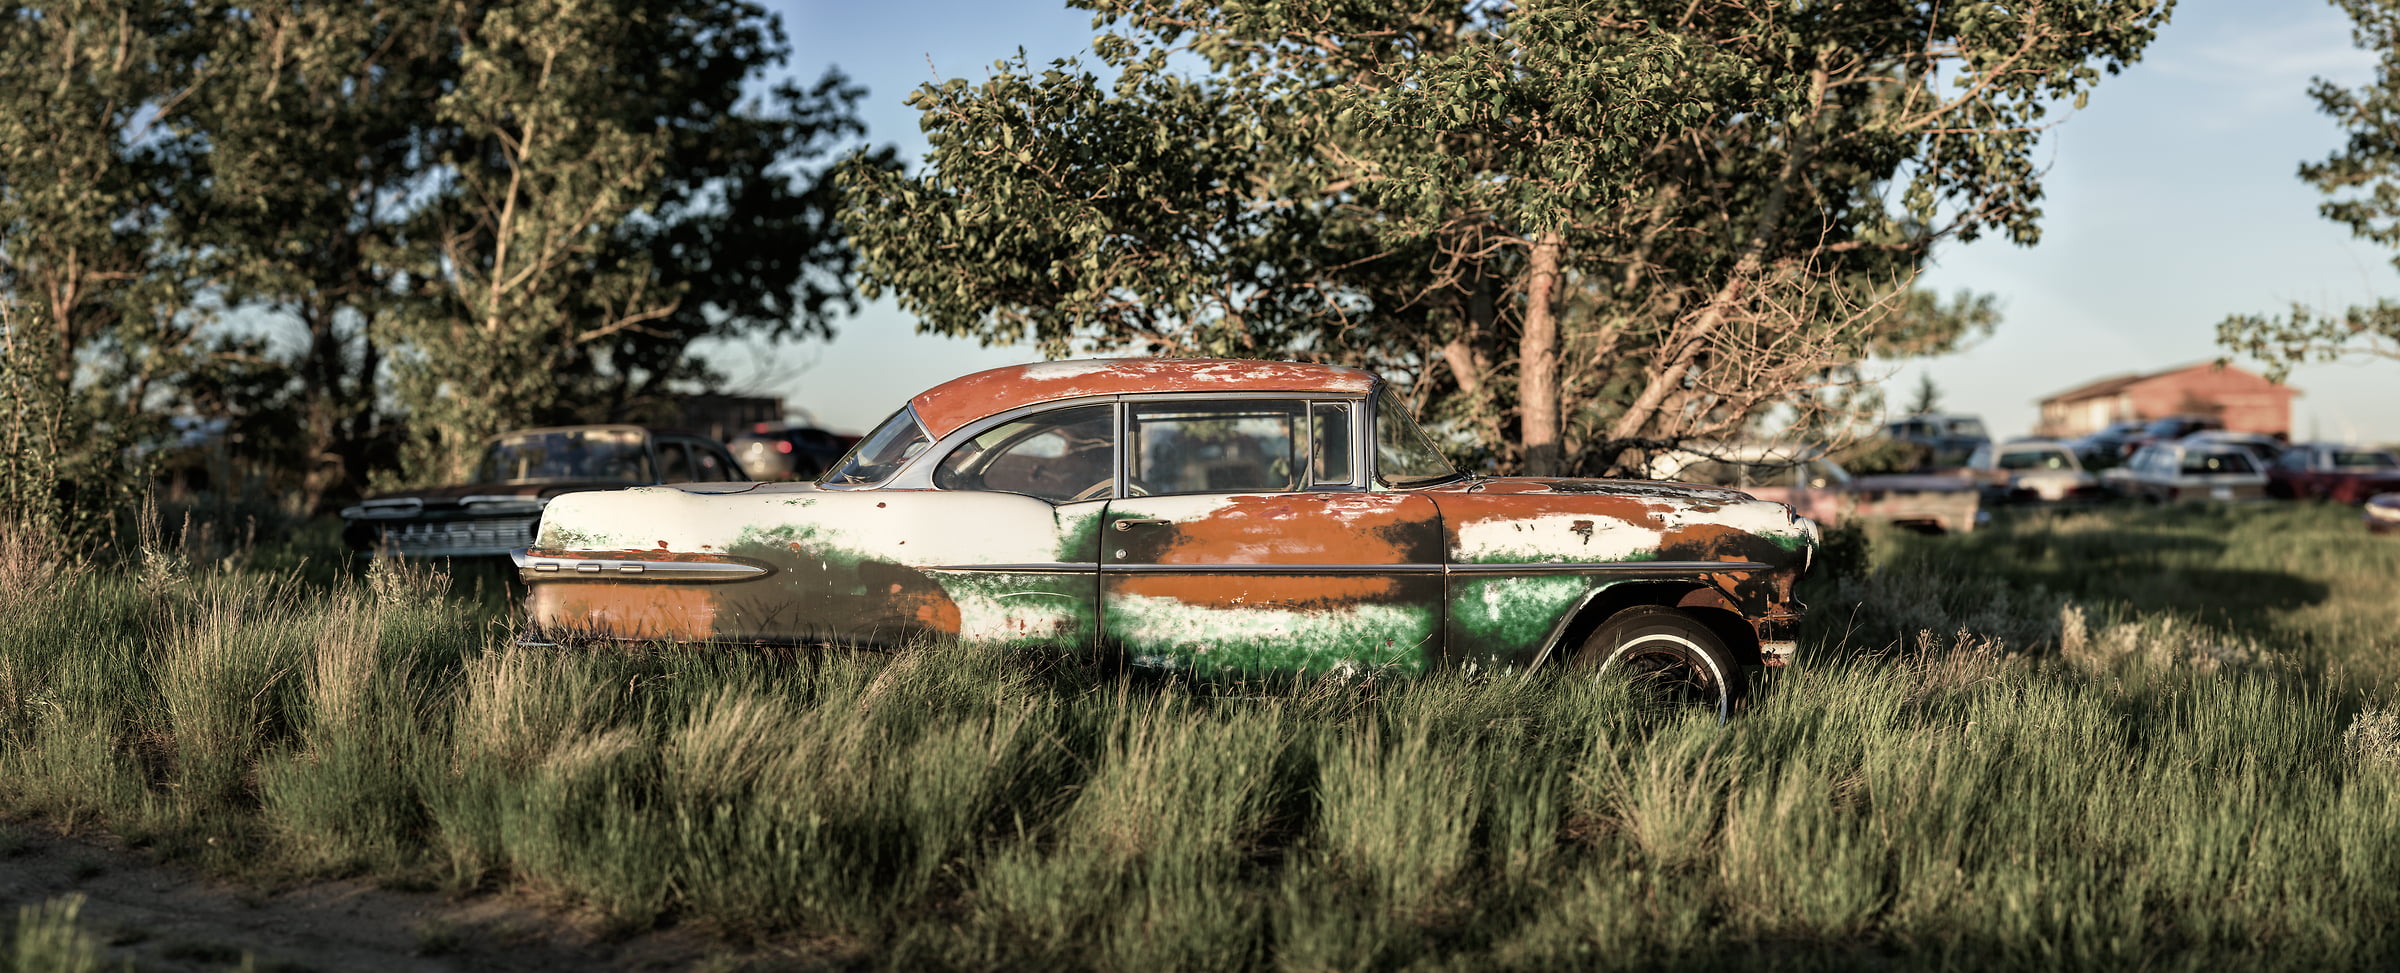 2,292 megapixels! A very high resolution, large-format VAST photo print of a car in a field; nostalgic photograph created by Scott Dimond in 